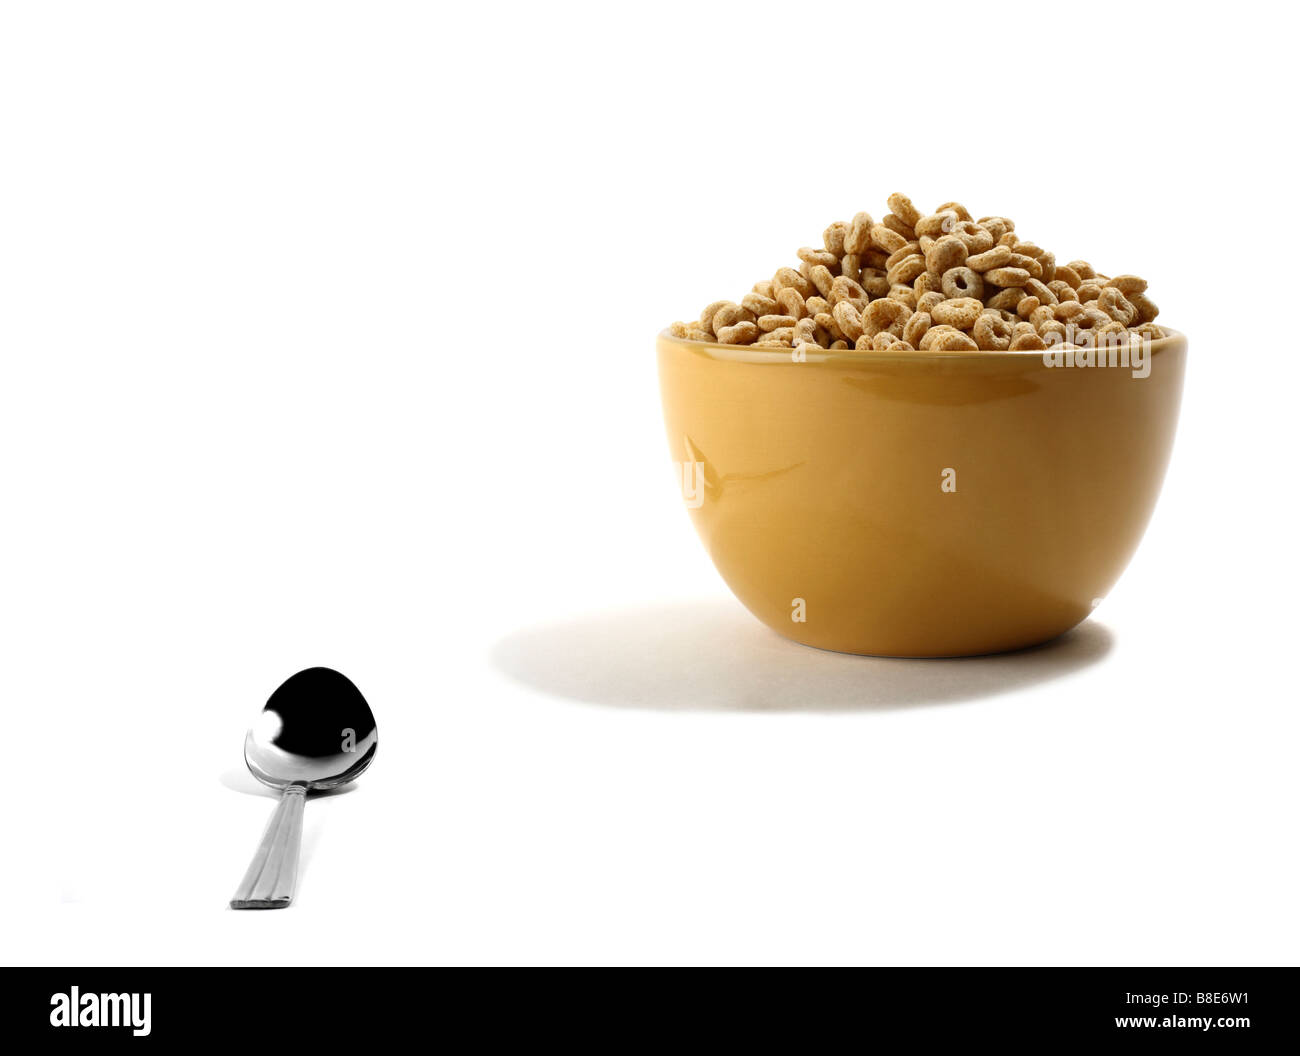 Cereal in Bowl with Spoon Stock Photo